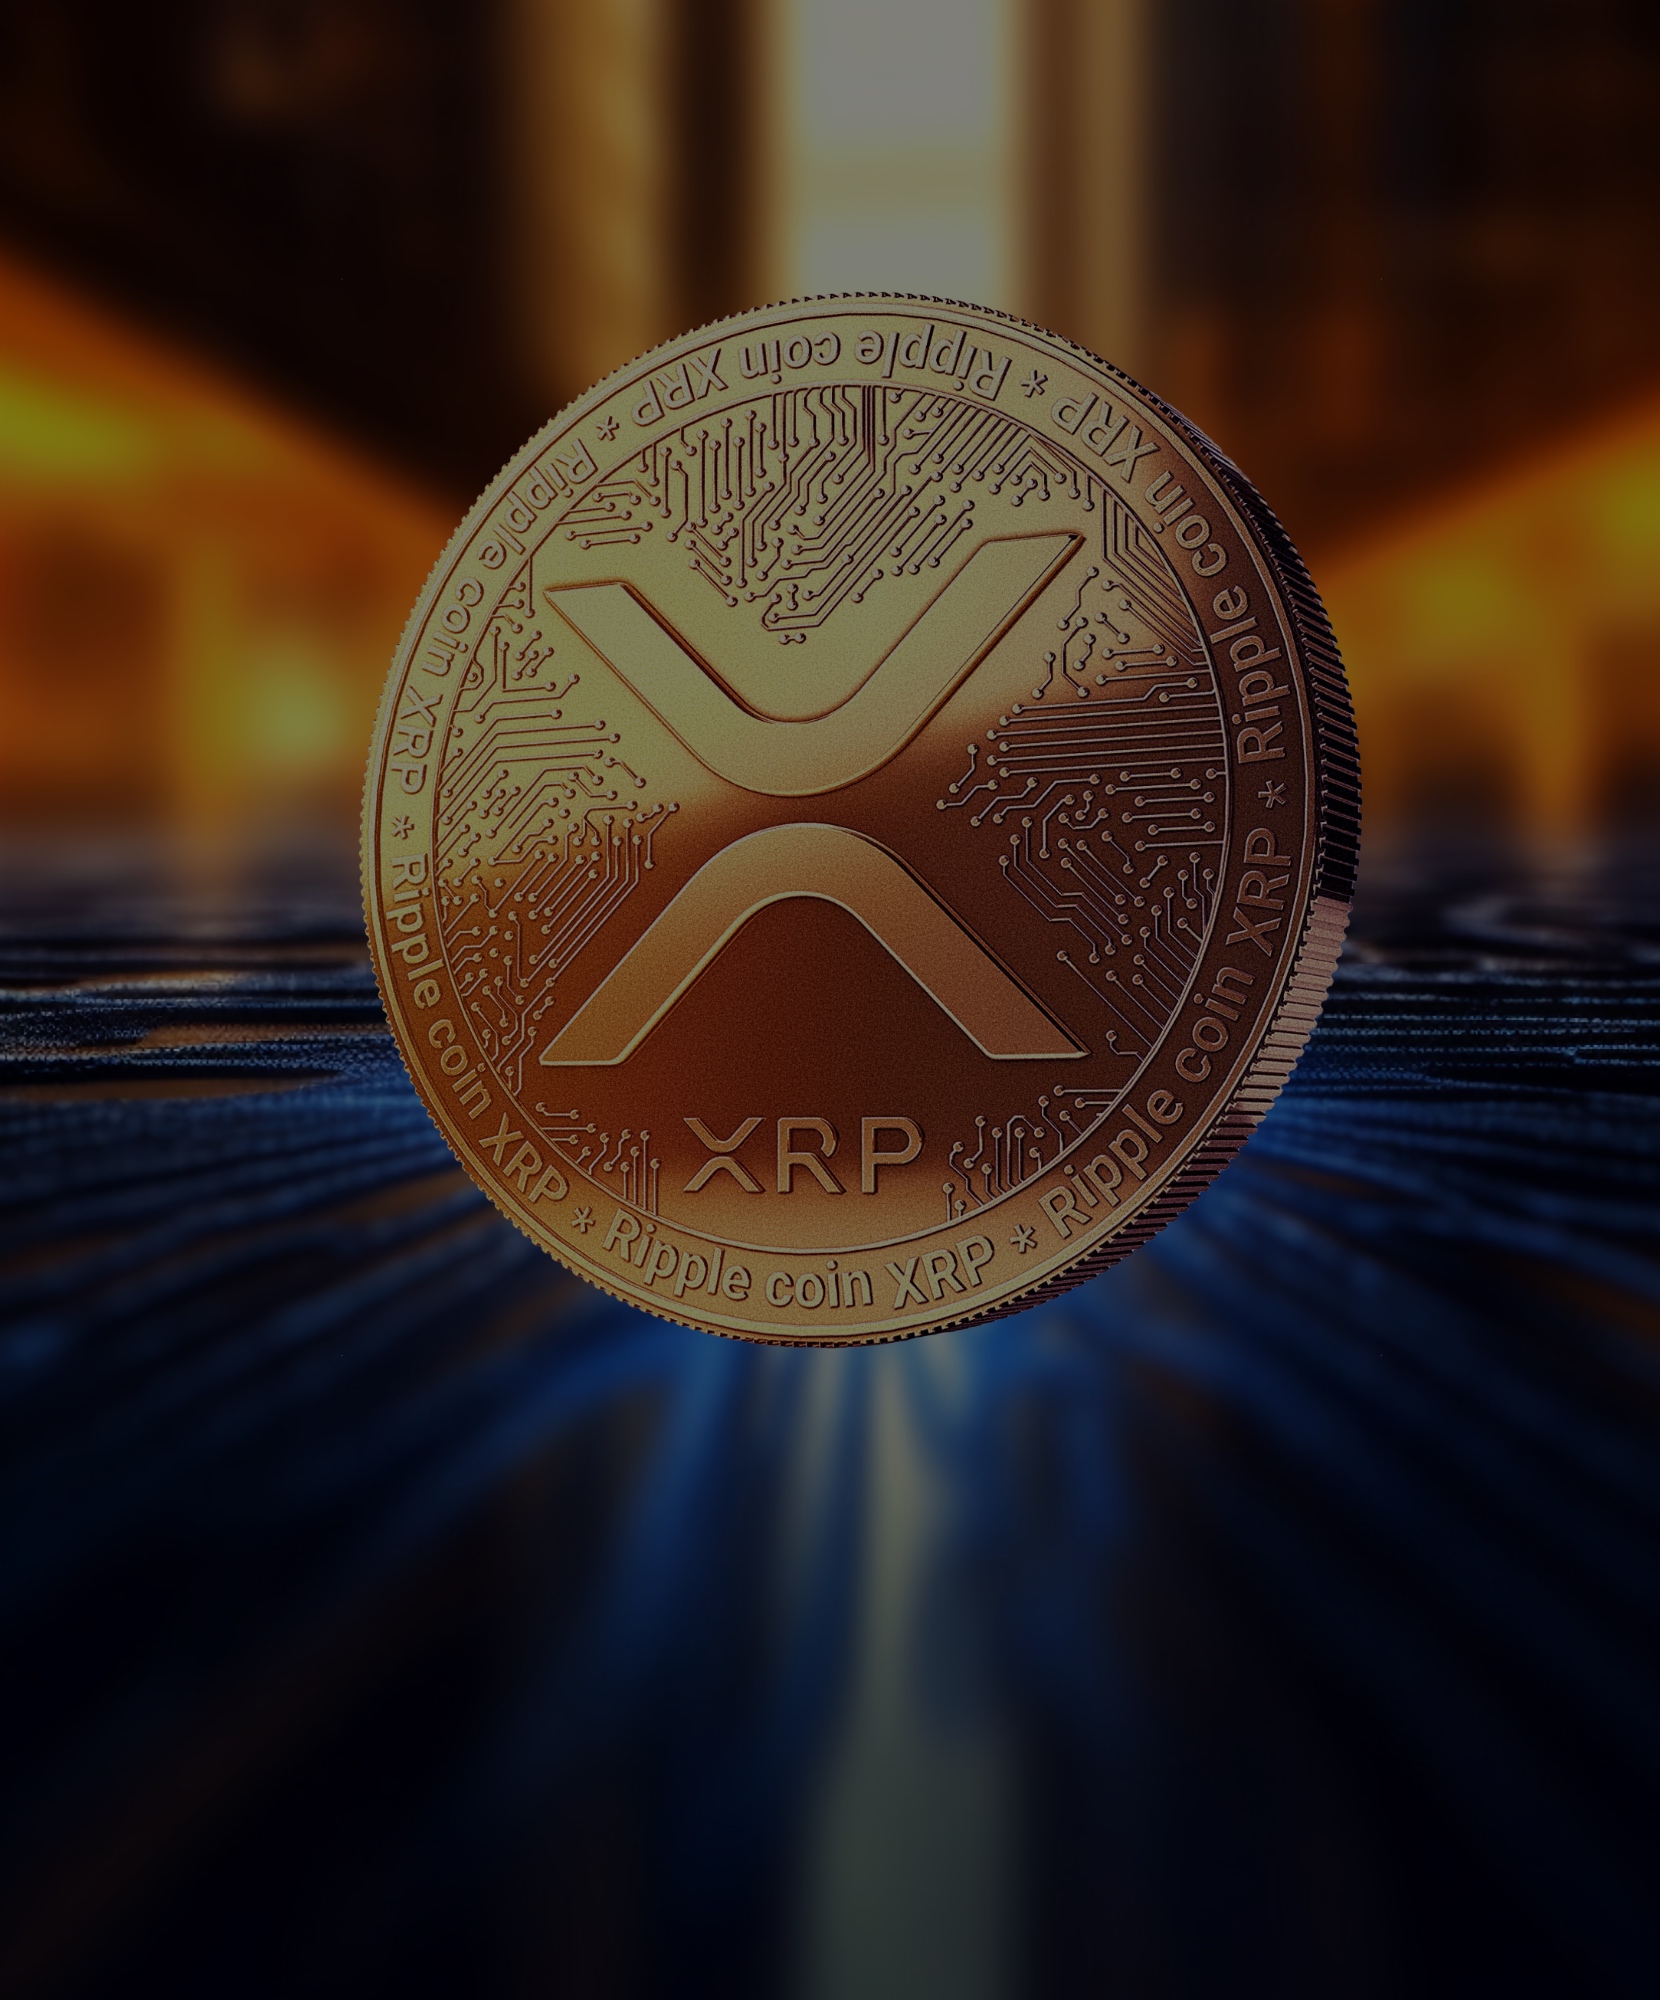 Image of XRP coin in a futuristic city